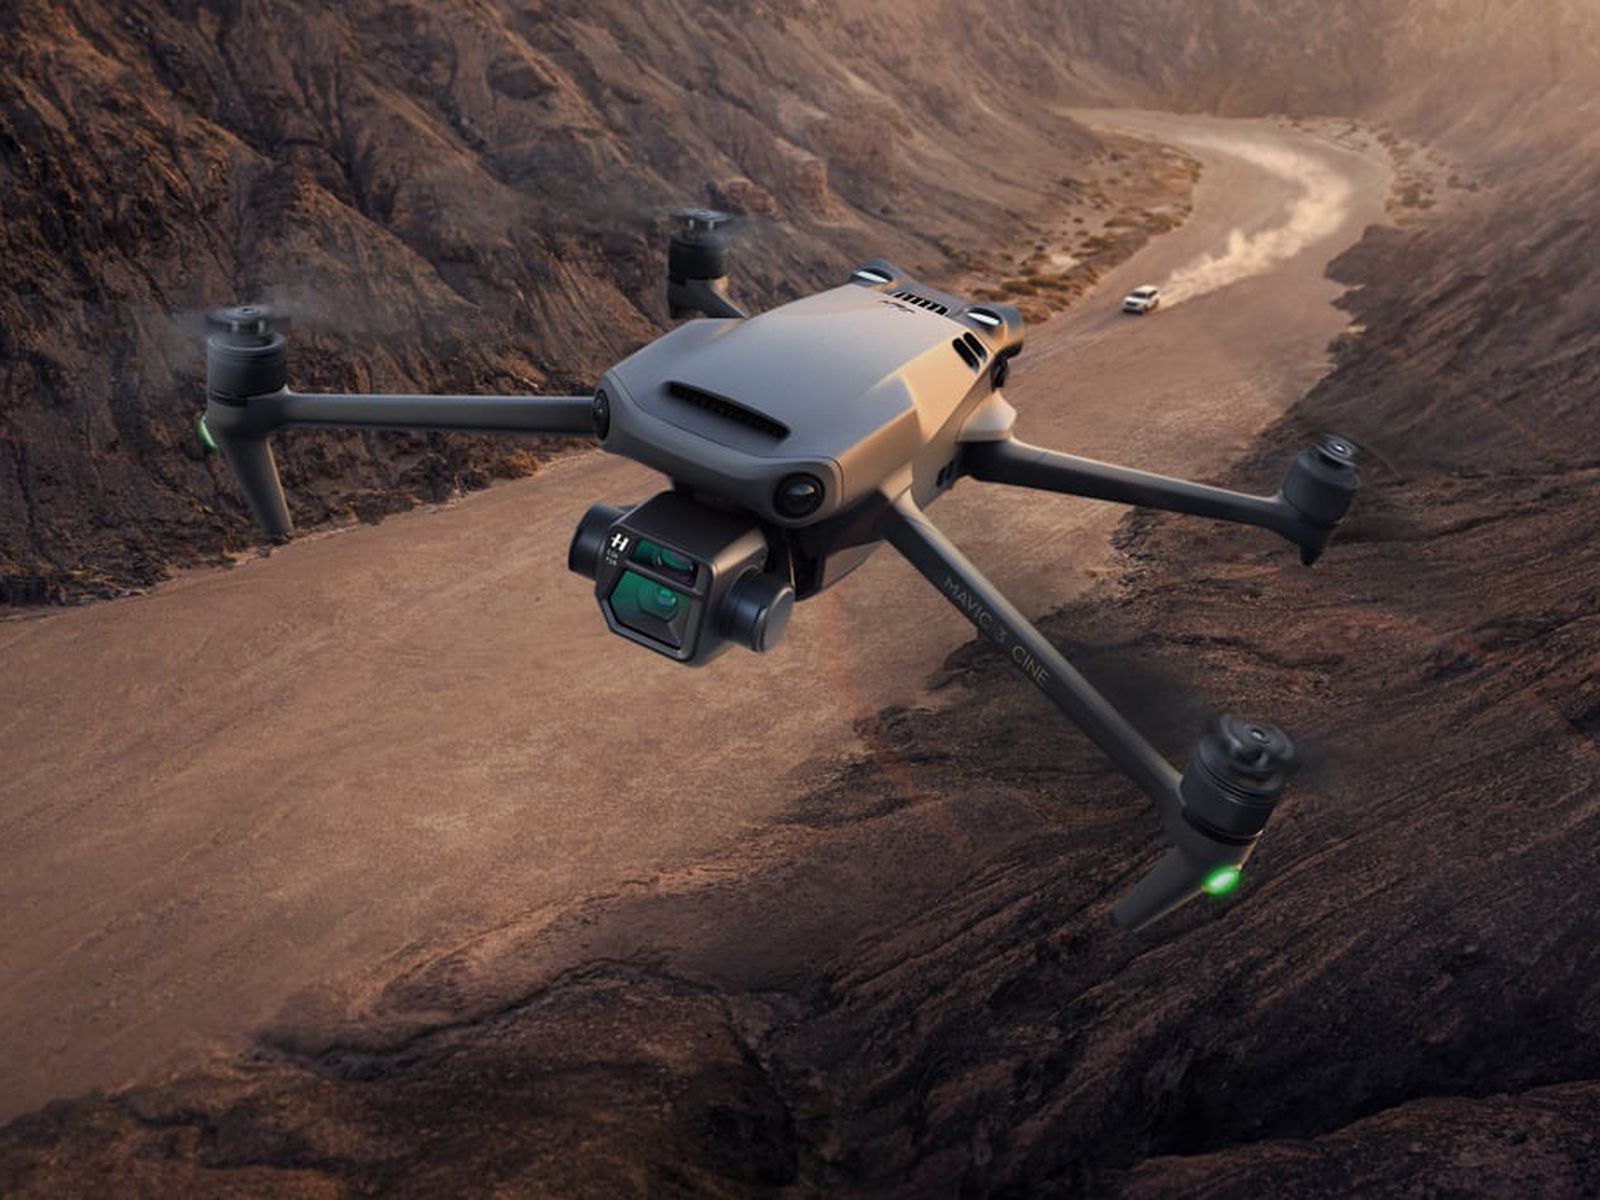 ketcher Klappe Give DJI Launches New Mavic 3 Drone With Longer Flight Time, Improved Cameras  and New Safety Features - MacRumors